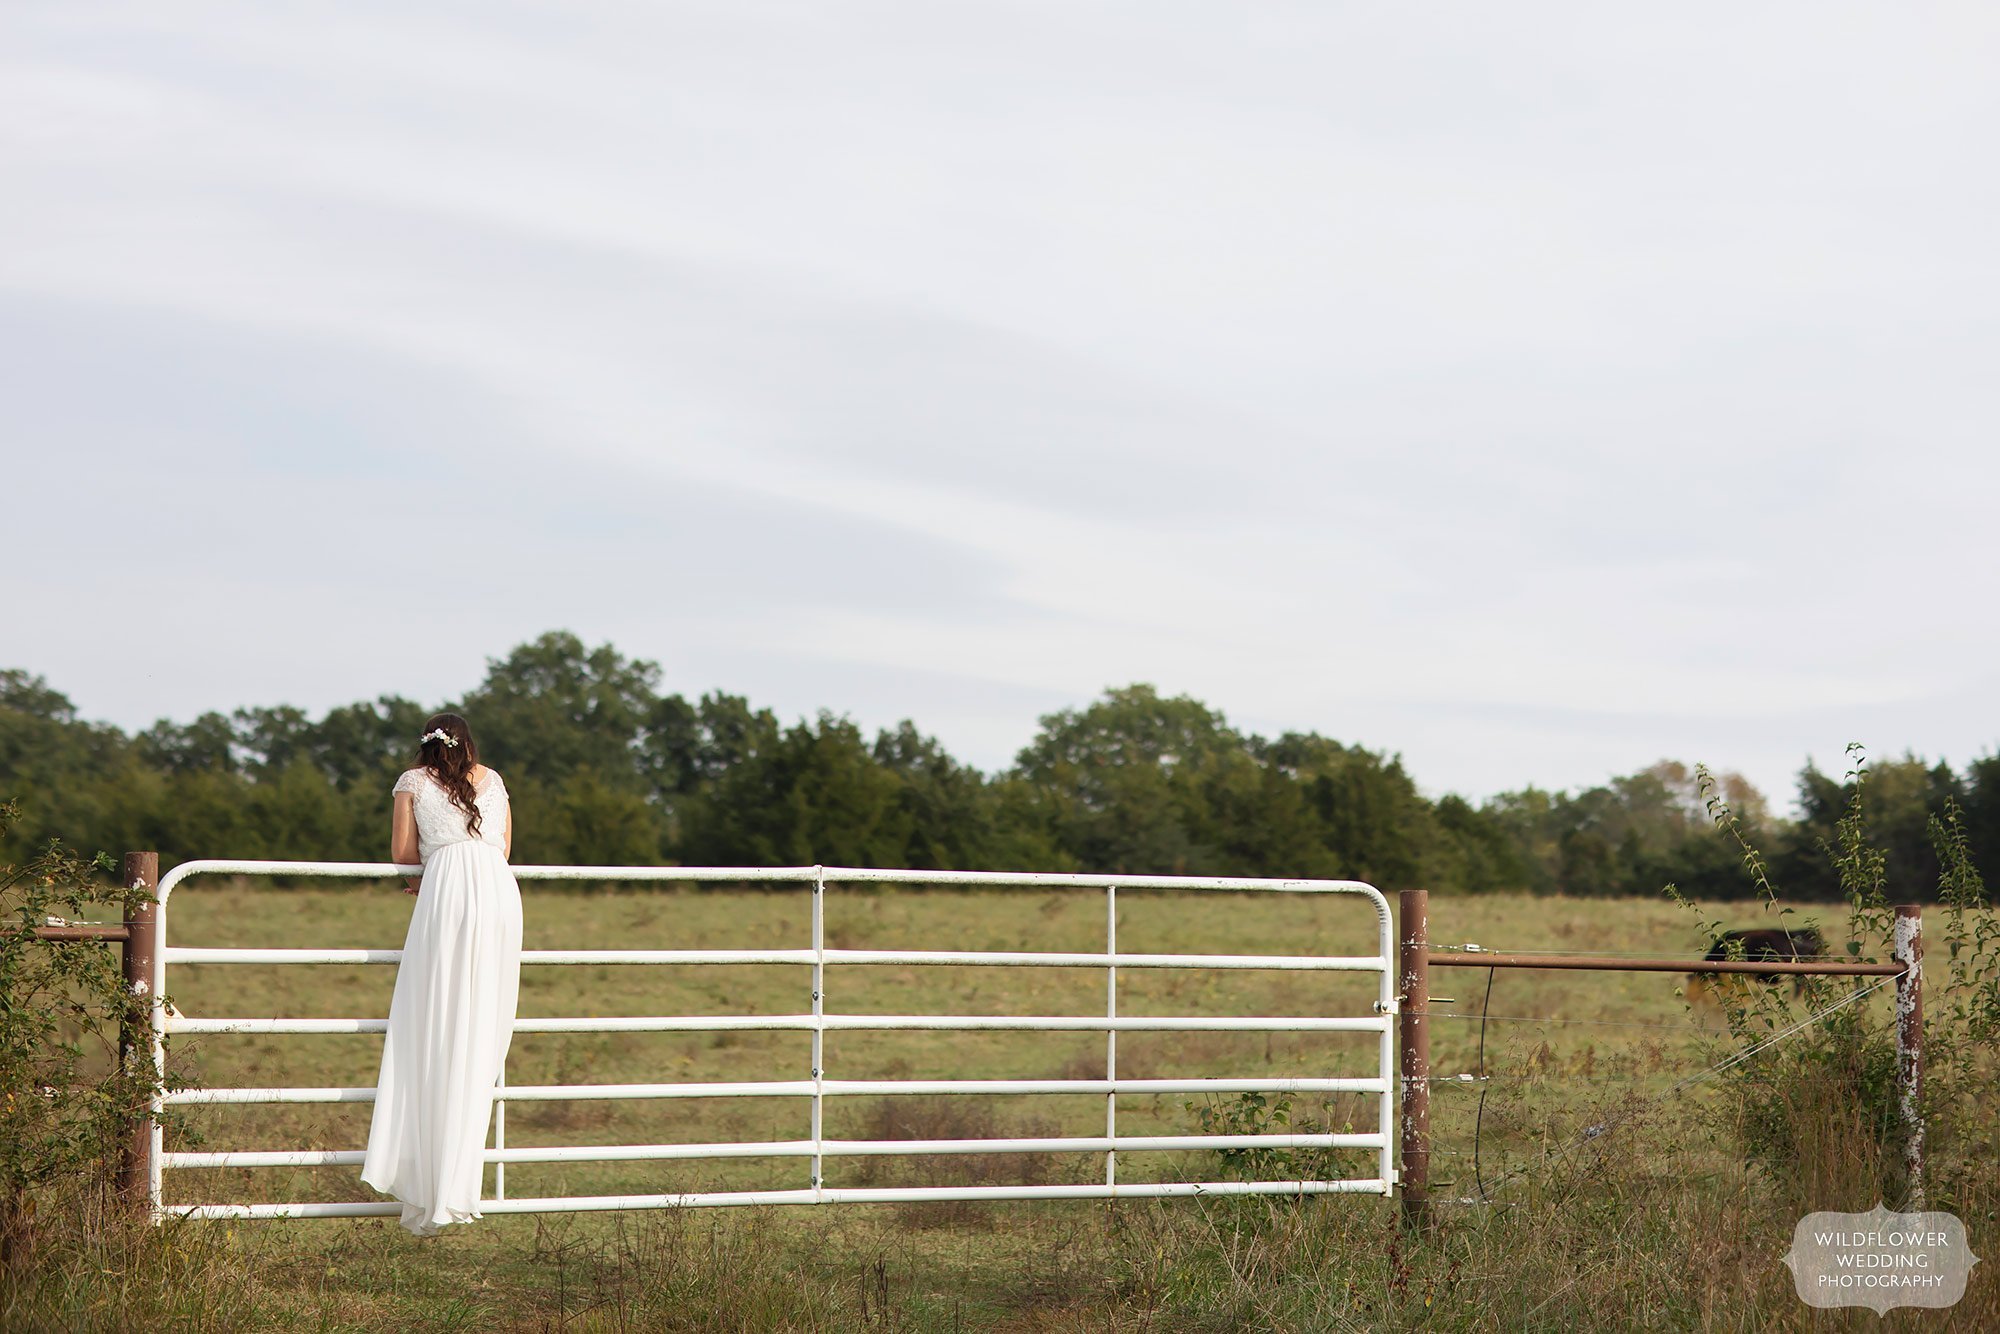 Bride stands on farm gate looking at cows in field.